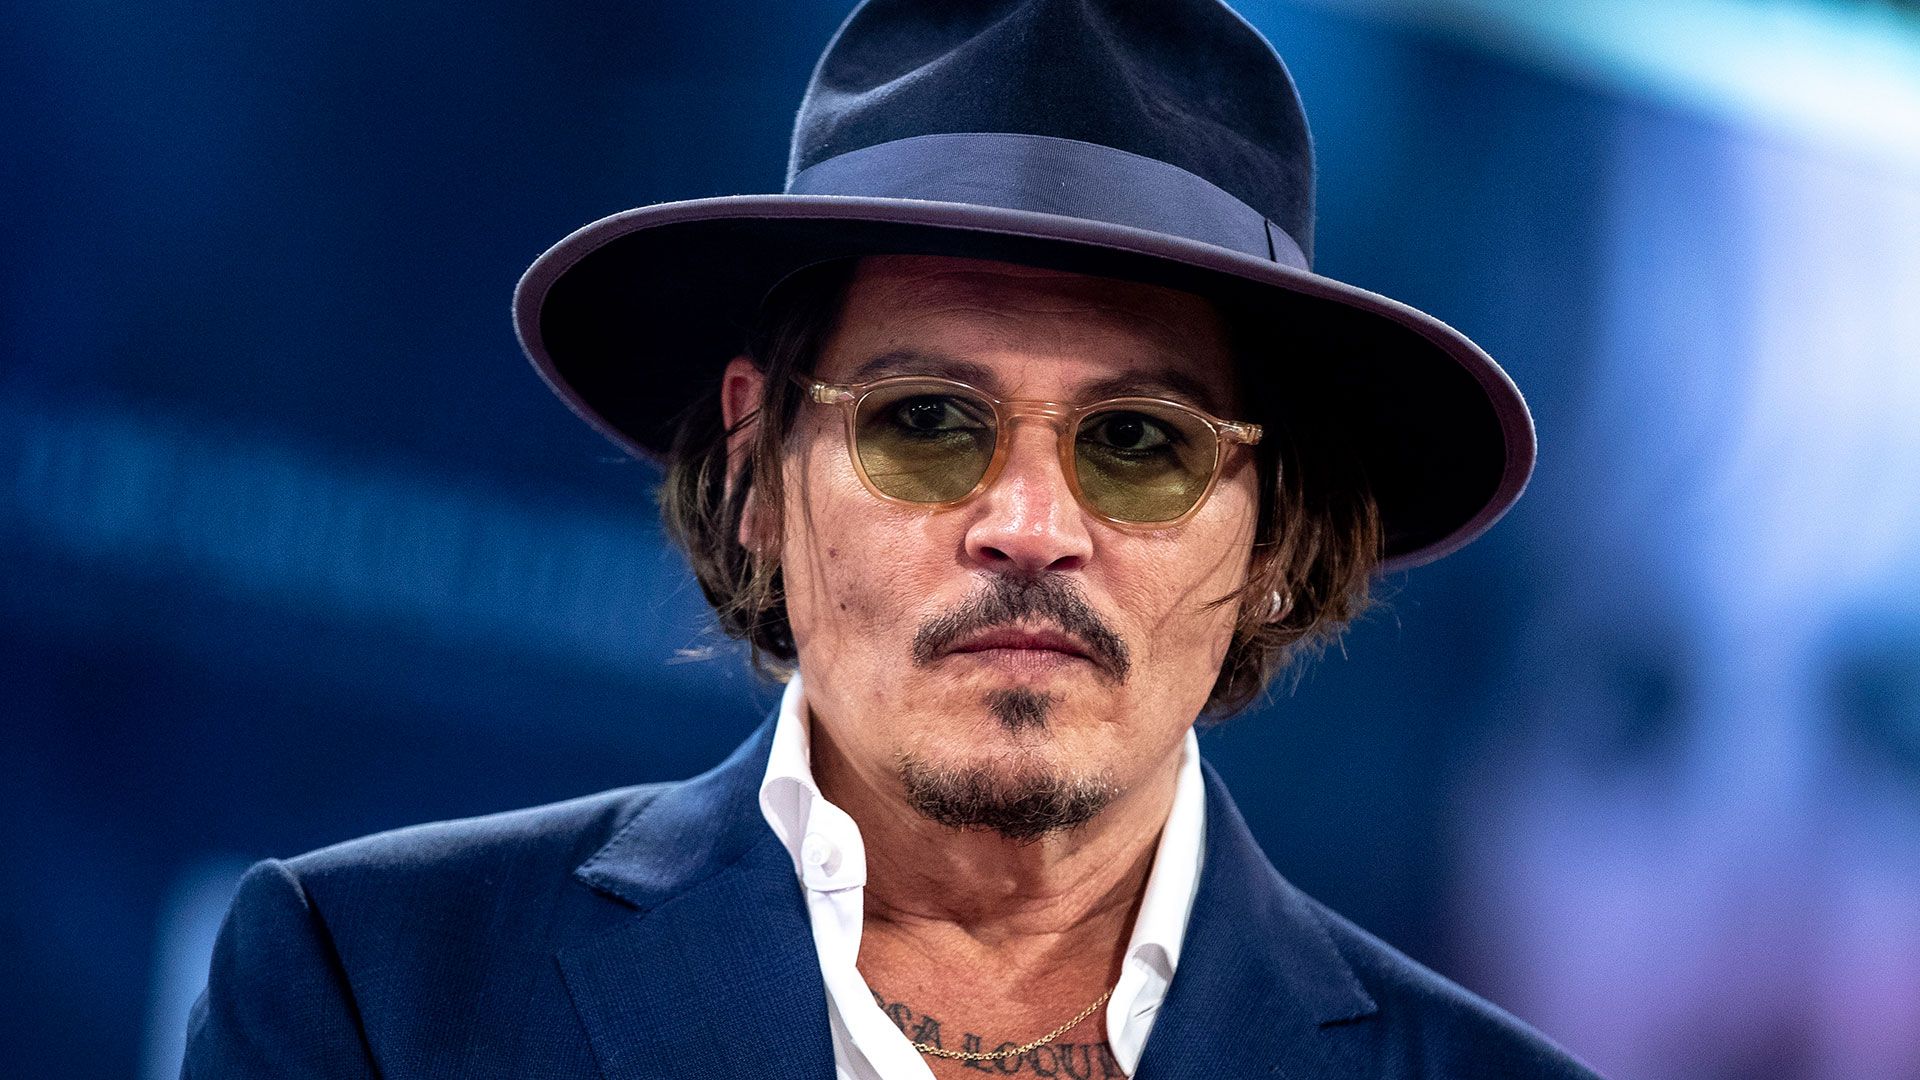 Depp hates calls and text messages